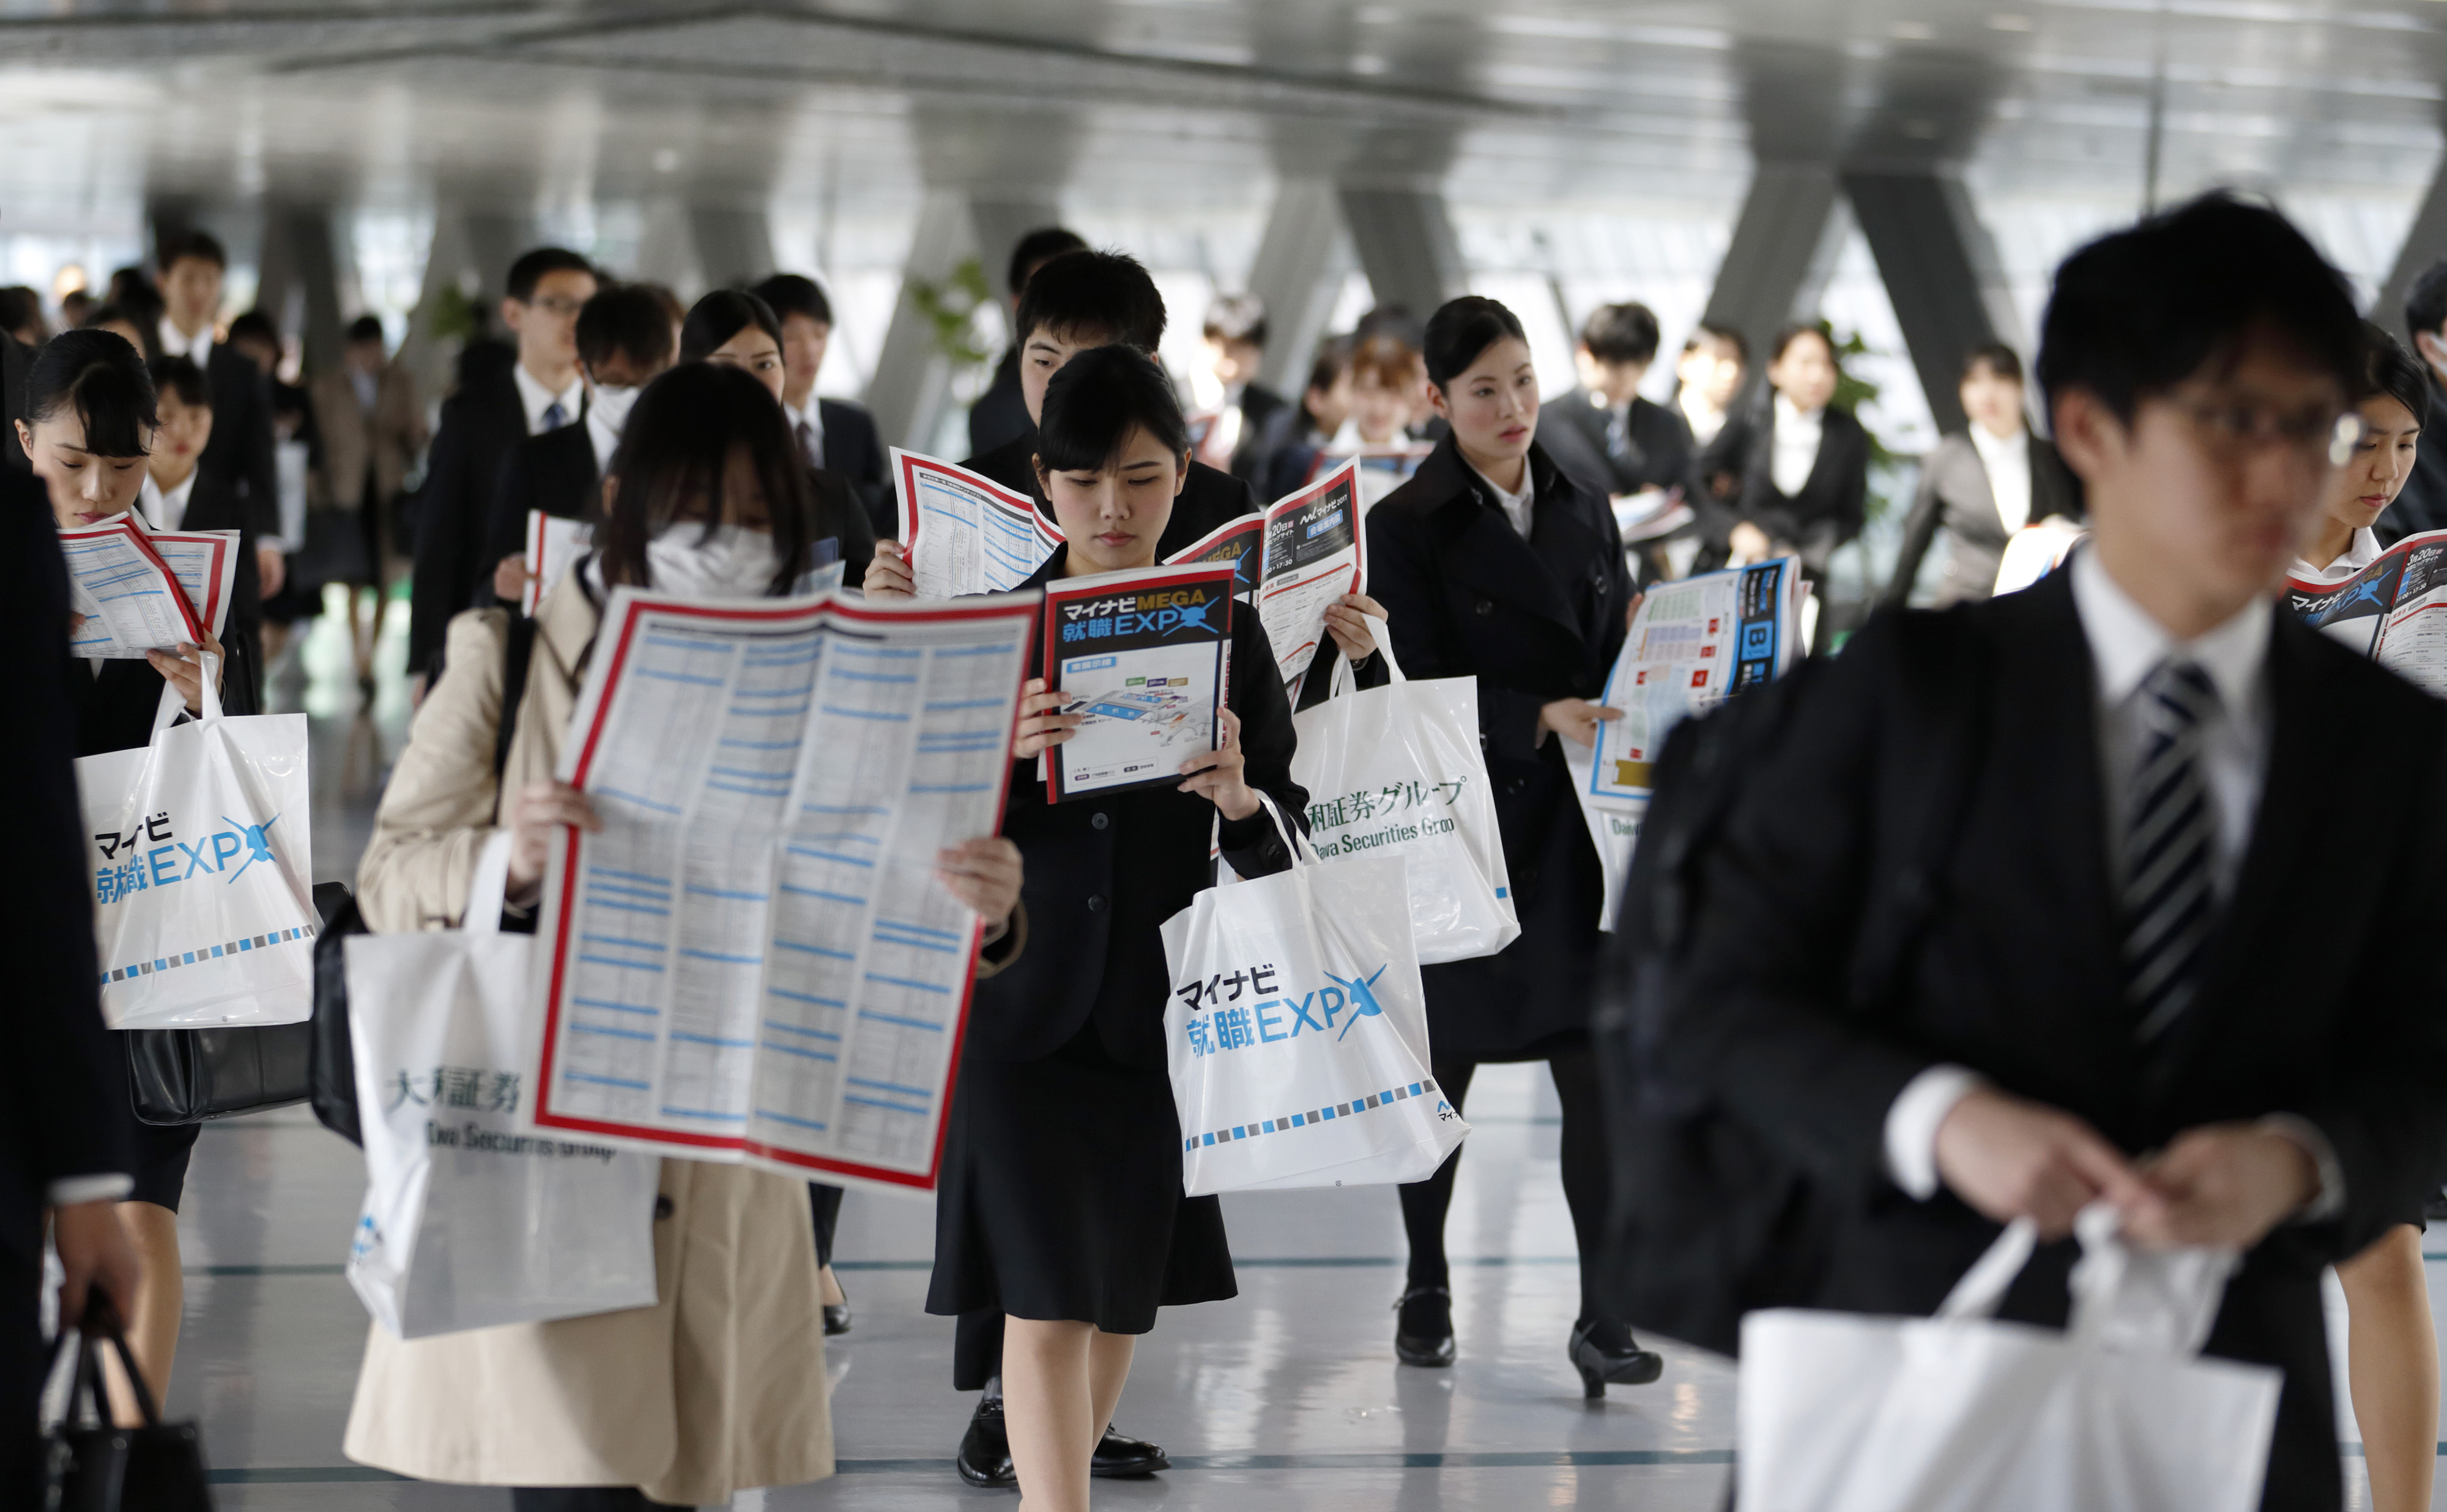 University students hold floor maps as they walk through a job fair in Tokyo. | BLOOMBERG